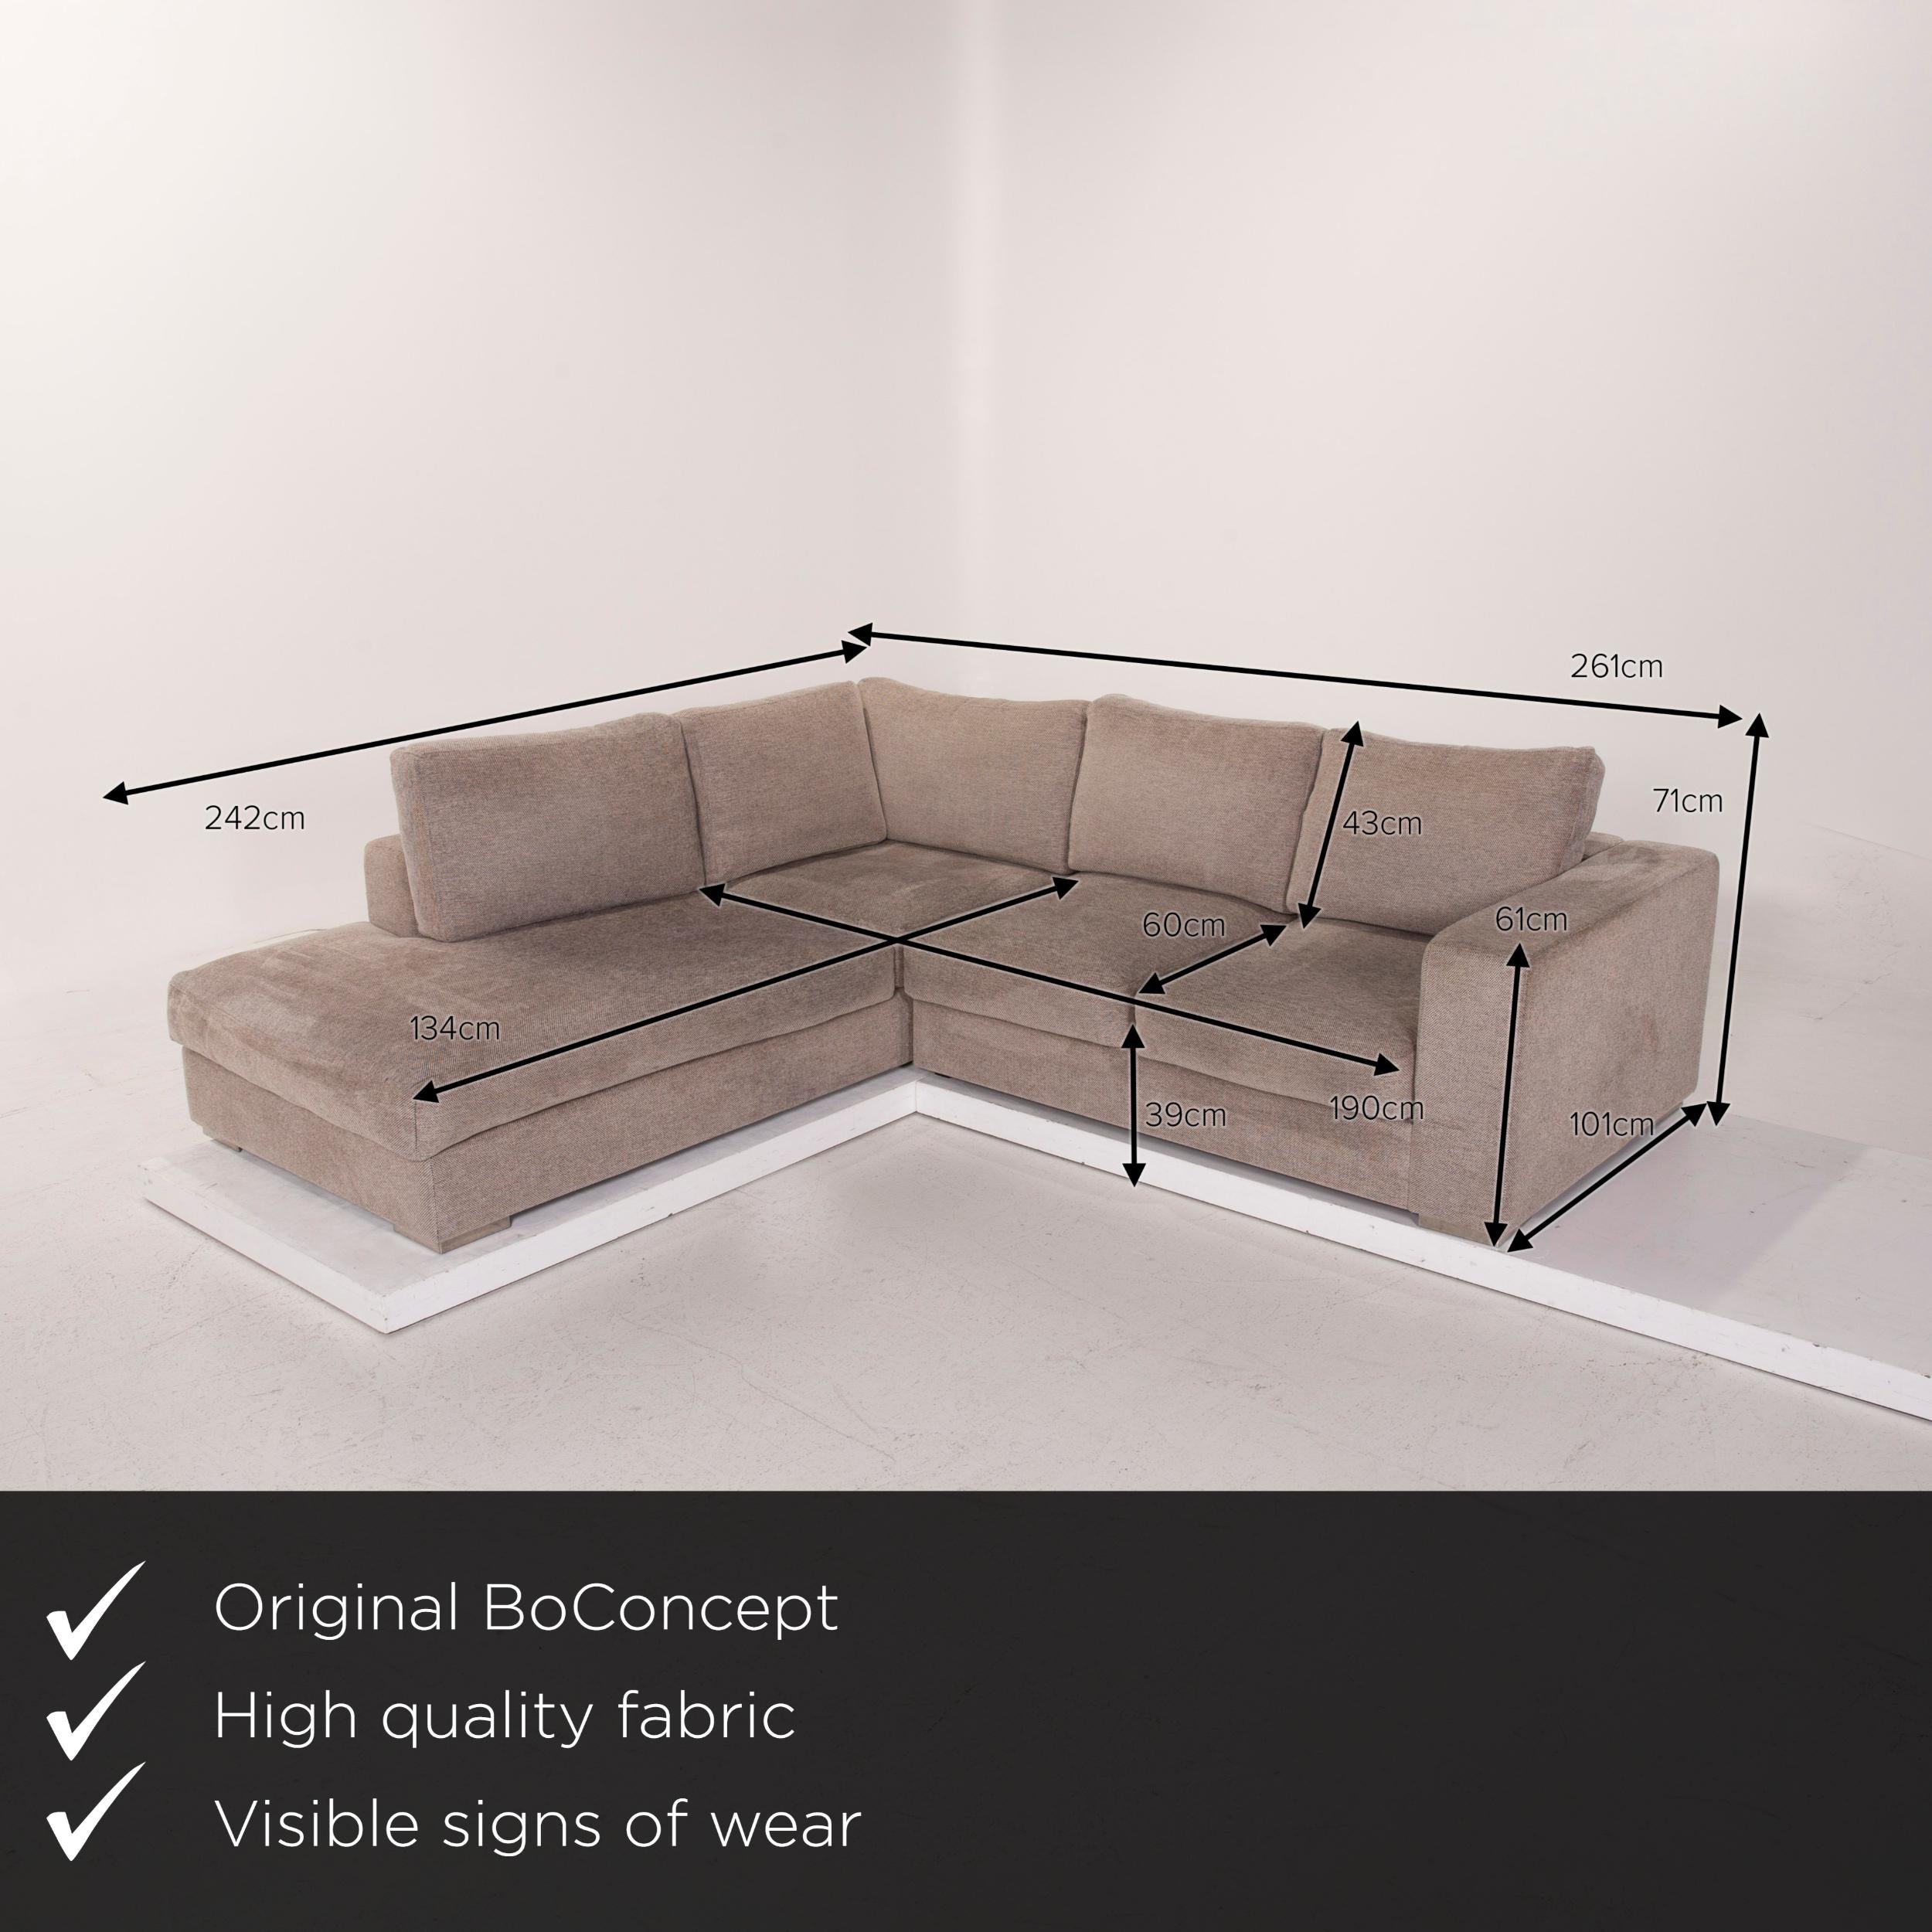 We present to you a BoConcept fabric sofa beige corner sofa.



 Product measurements in centimeters:
 

Depth 101
Width 242
Height 71
Seat height 39
Rest height 61
Seat depth 60
Seat width 134
Back height 43.
 